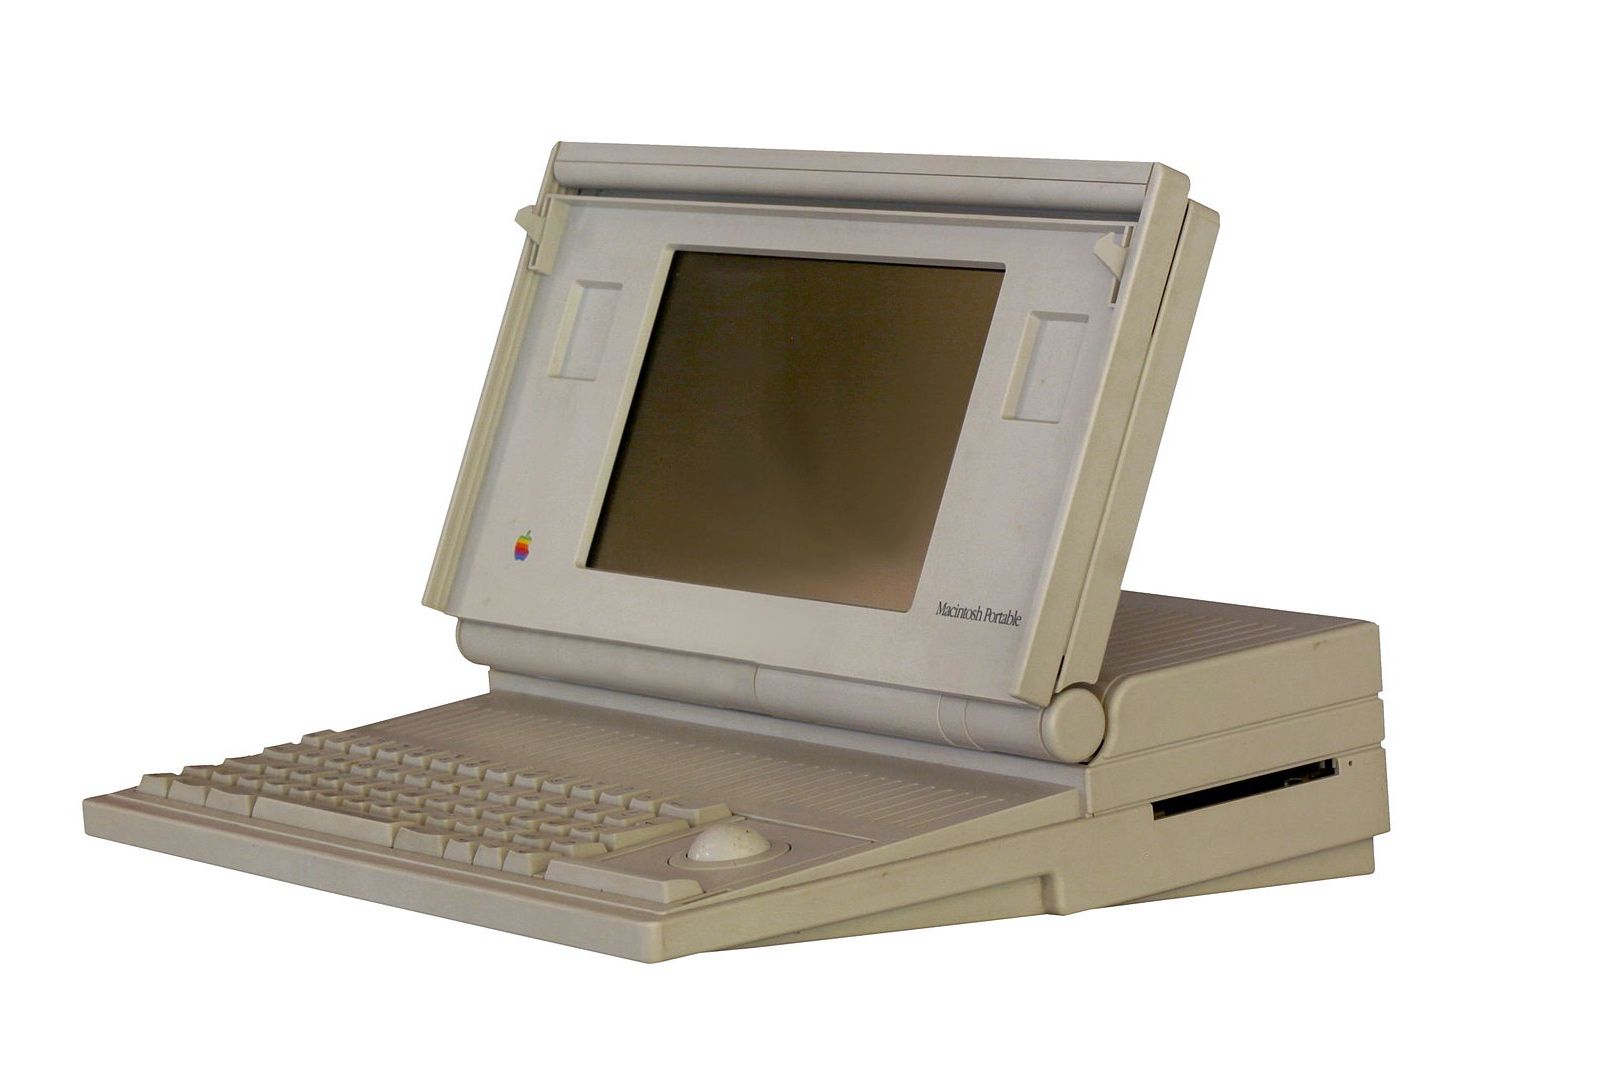 Historic Apple Mac Computers - Walk Down Memory Lane With These Classic Machines image 4